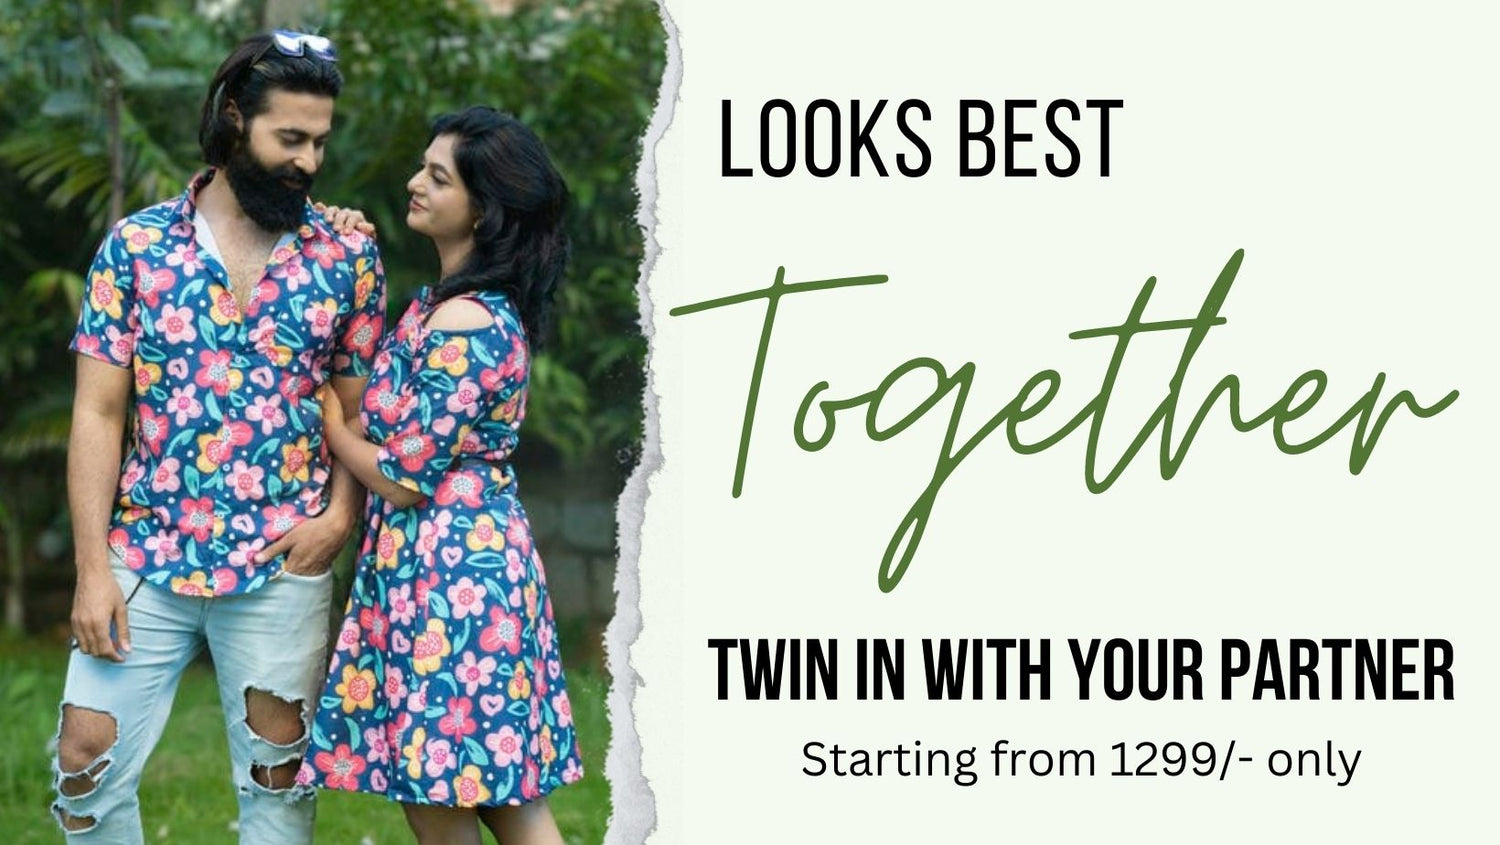 Tusok Couple Matching combo dress men shirt and women dress floral banner looks best together twin in with your partner Starting from 1299/- only